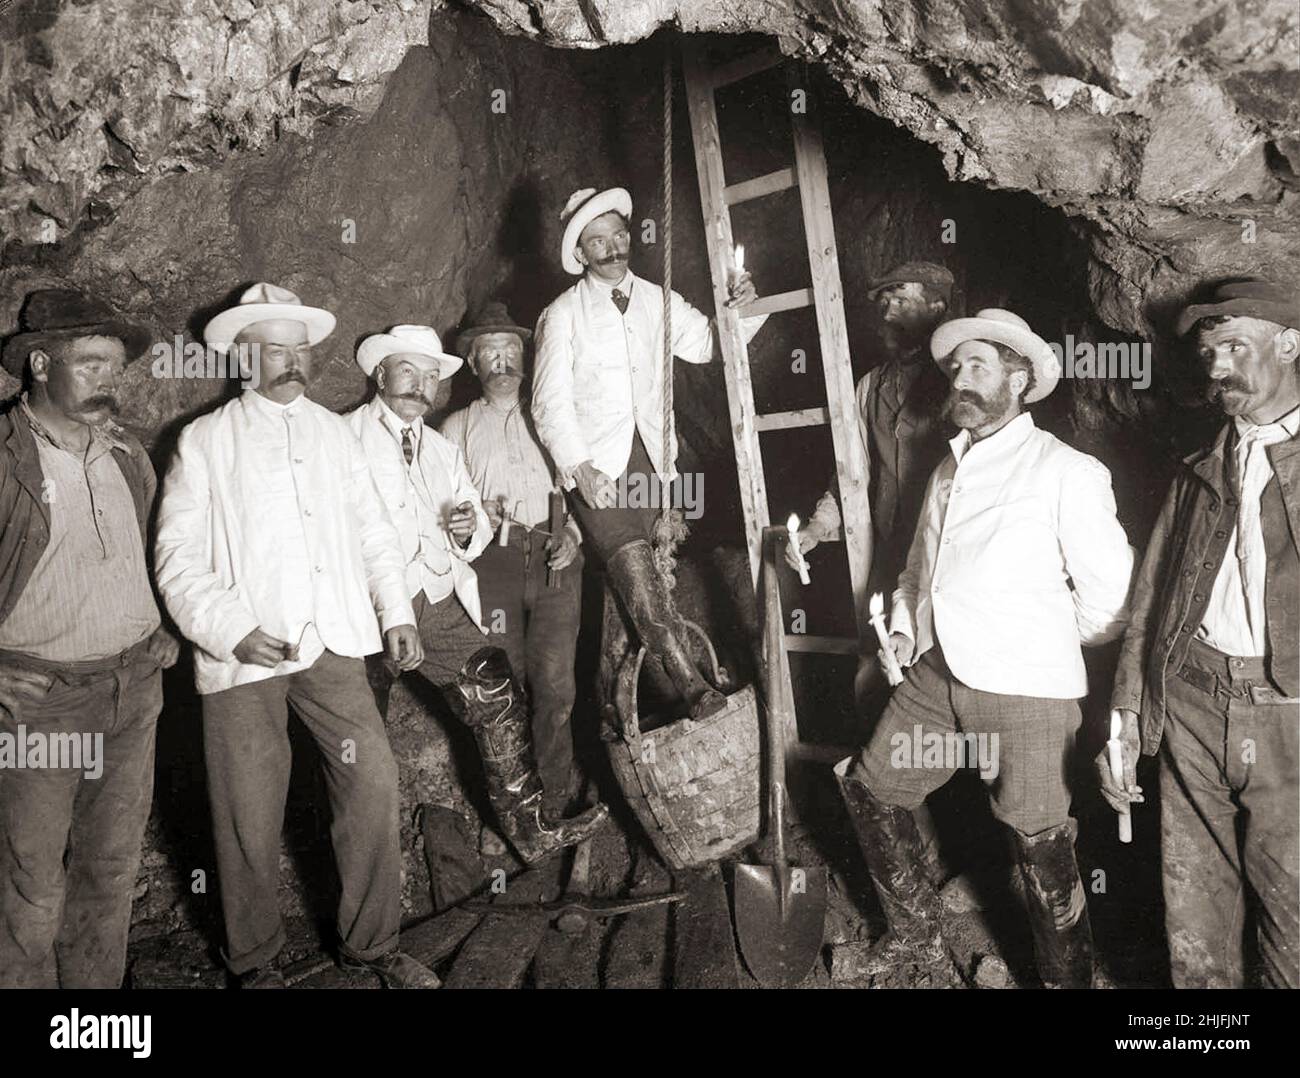 A vintage photograph of miners and managers (the clean ones) in the copper mine at Tankardstown shot on 1906. The The Mining Company of Ireland was established in Dublin in 1824 and quickly took leases on mineral areas all over the country. Knockmahon proved to be the most profitable of all their operations, but by 1840 it was at its peak. In their search for other lodes in the neighbourhood they discovered Tankardstown just as Knockmahon was threatening to flood. Stock Photo